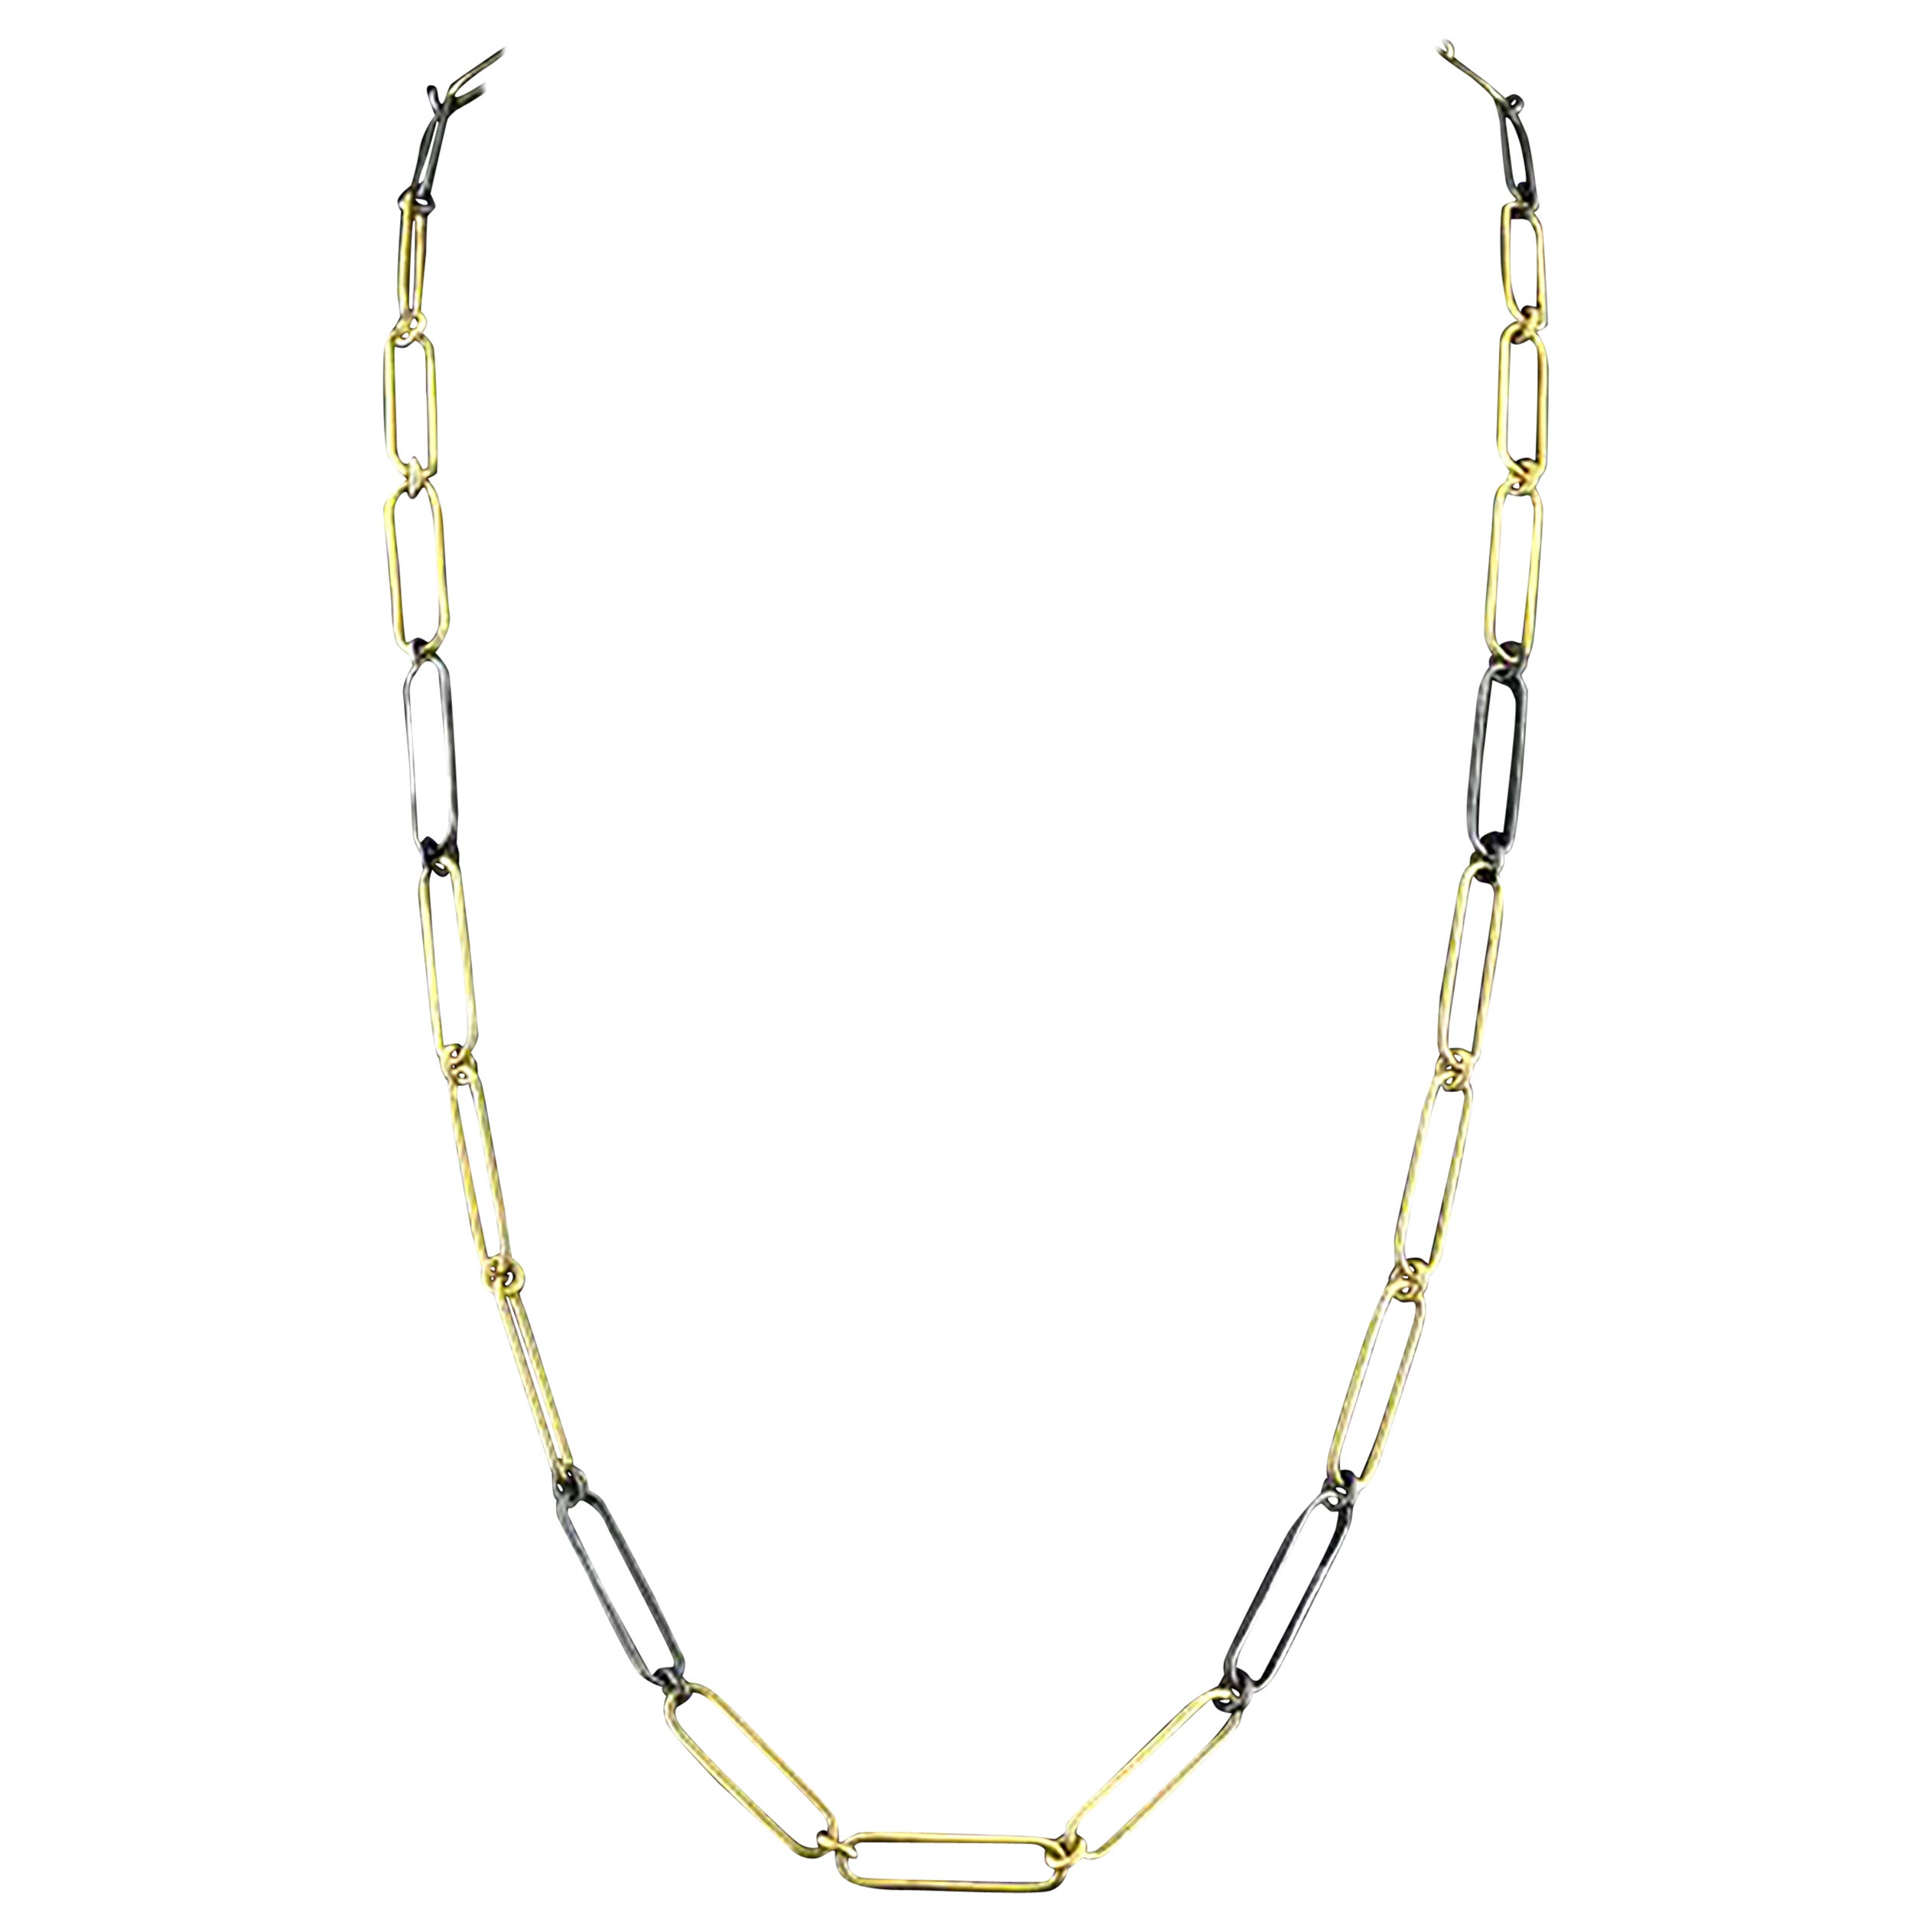 Two-Toned 24K Gold and Silver Long Paperclip Link Chain Necklace by Kurtulan